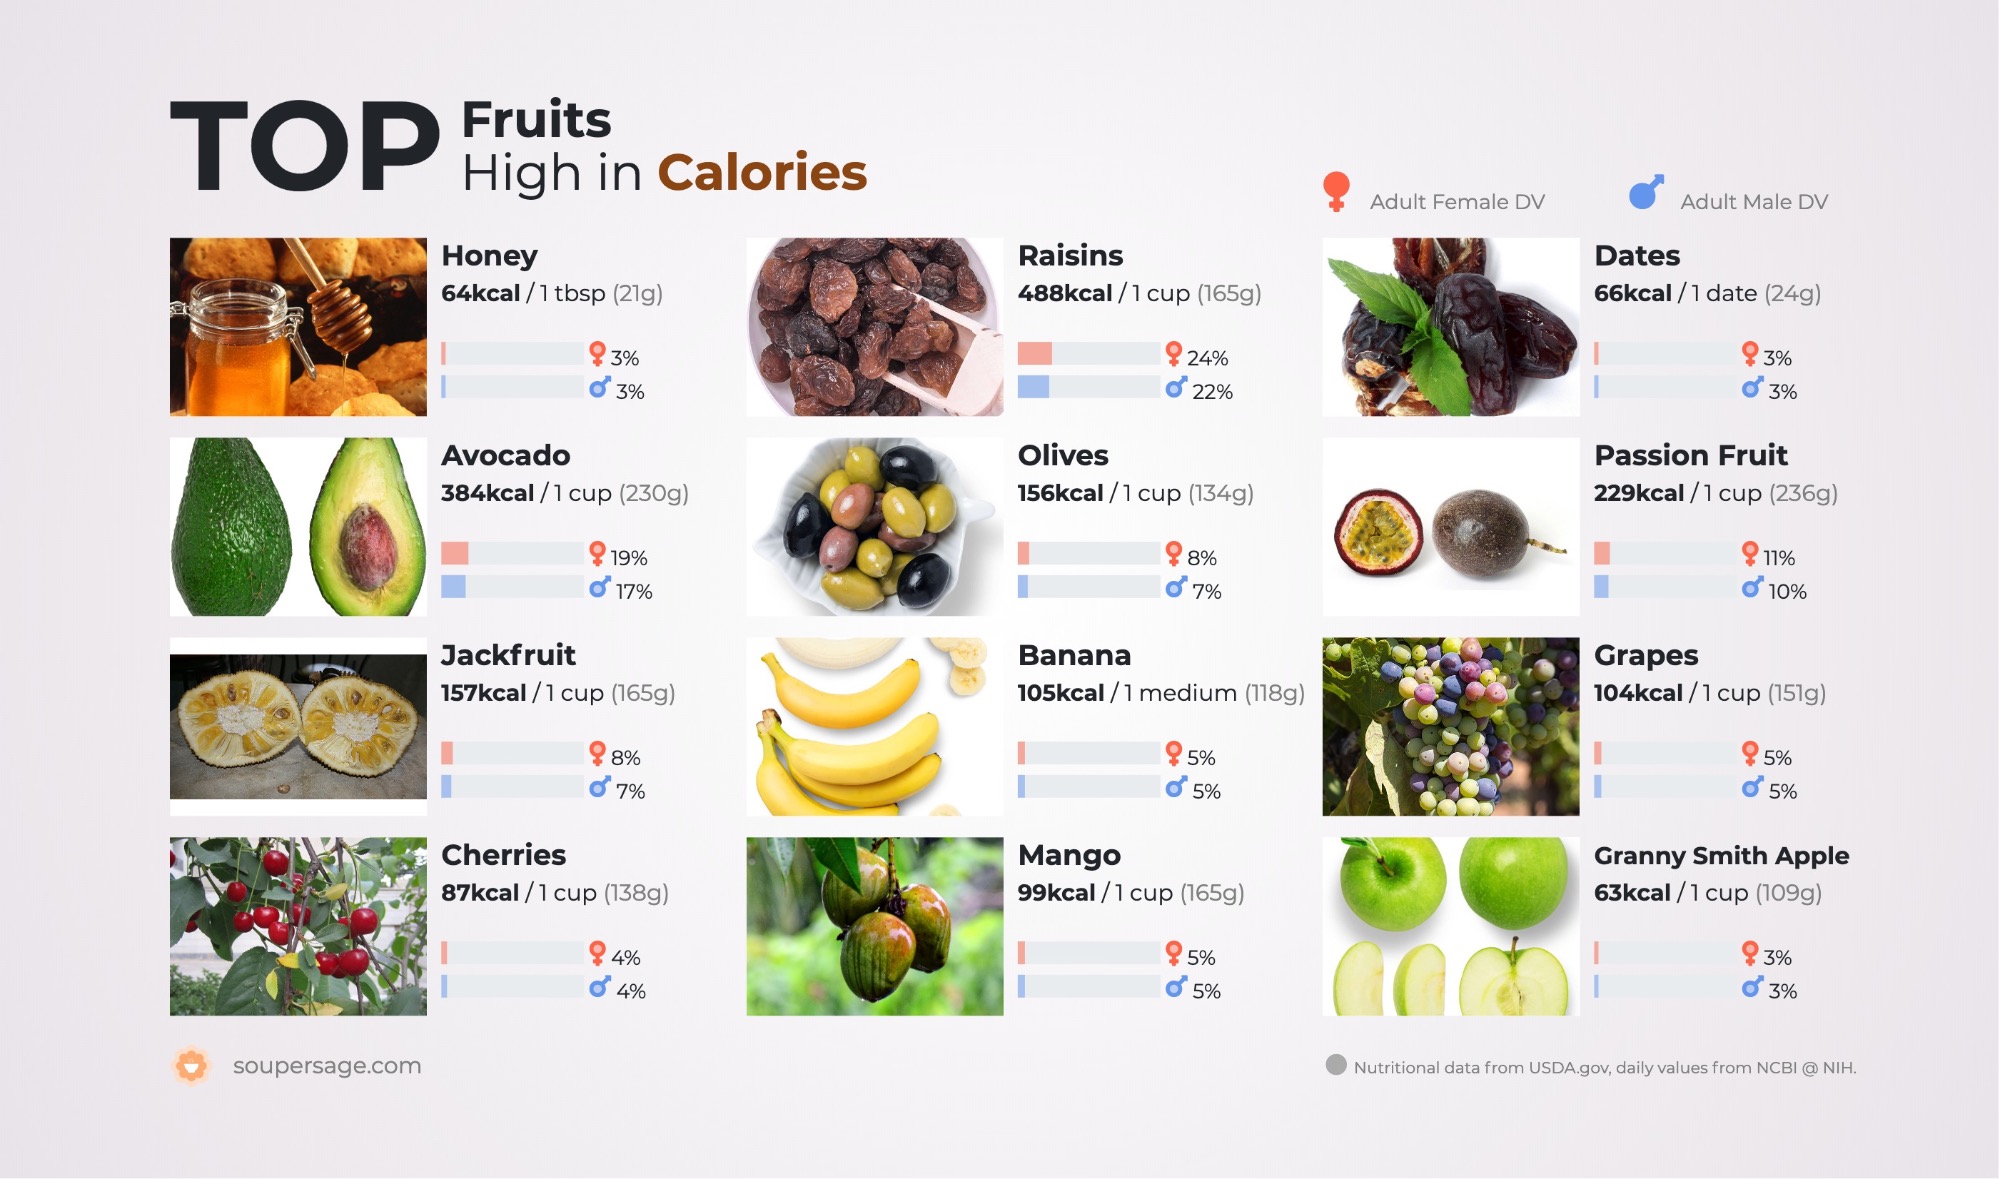 image of Top Fruits High in Calories